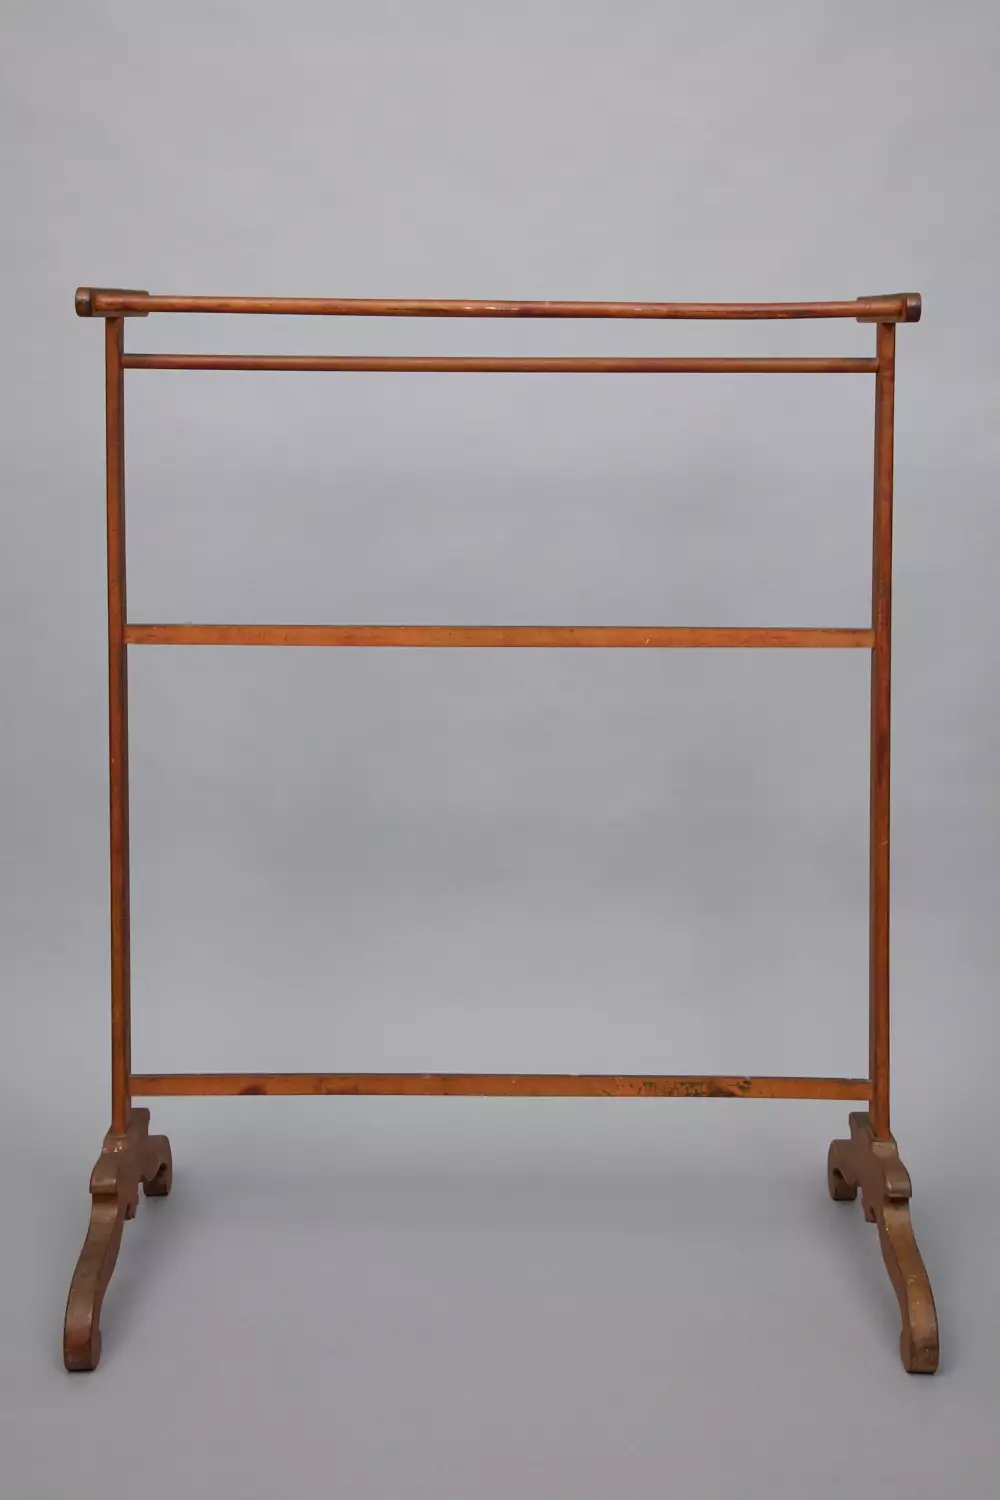 A wooden clothes rack on a gray background.